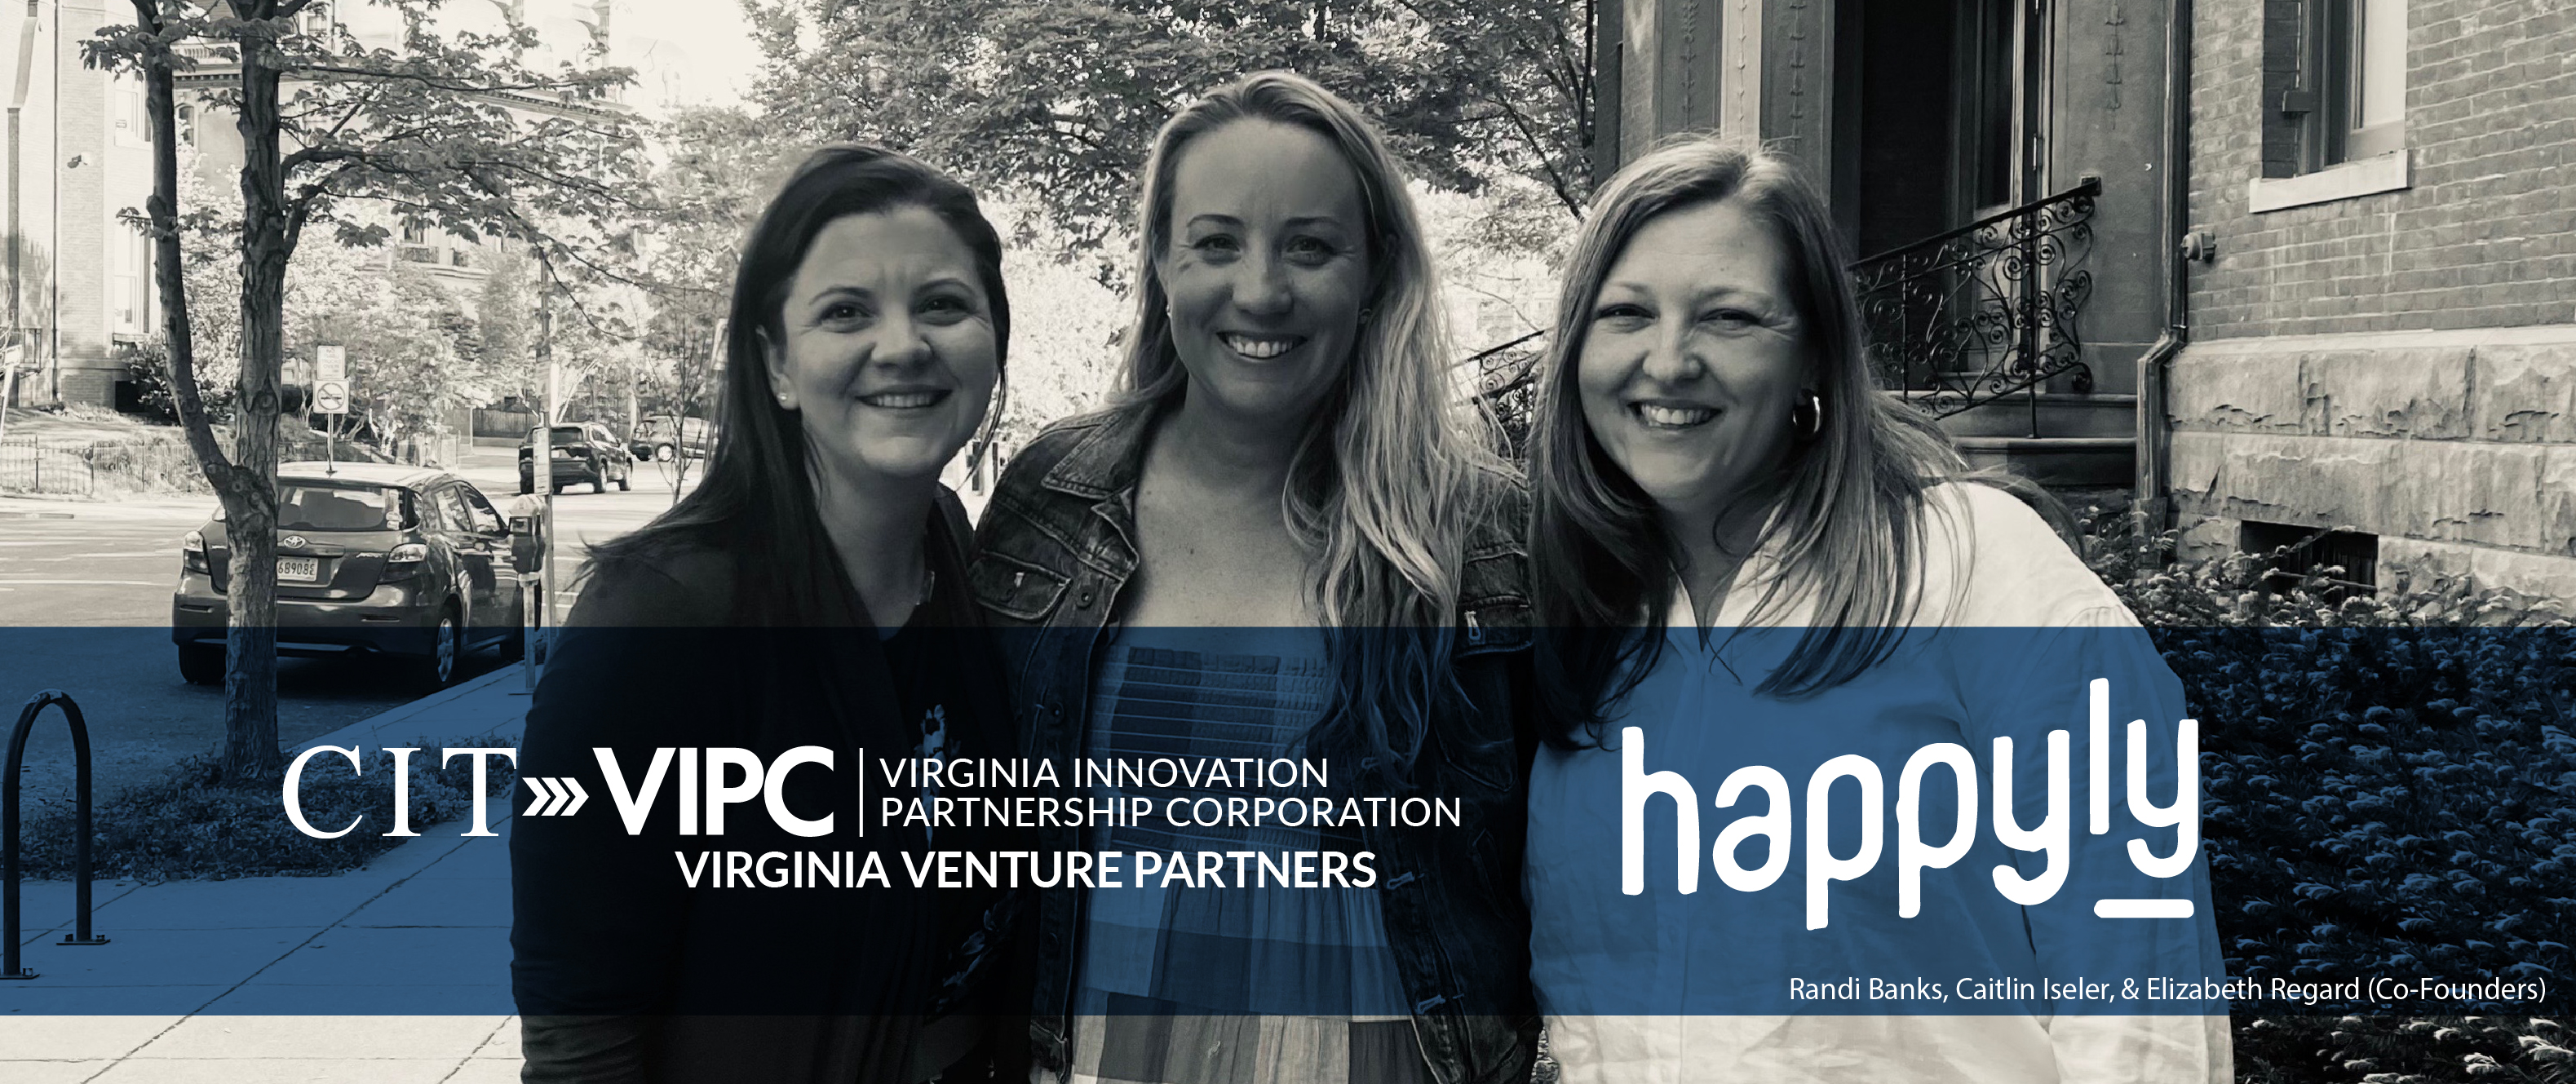 VIPC's Virginia Venture Partners Invests in happyly to Support Working Parents with Wellness Solutions for Their Families